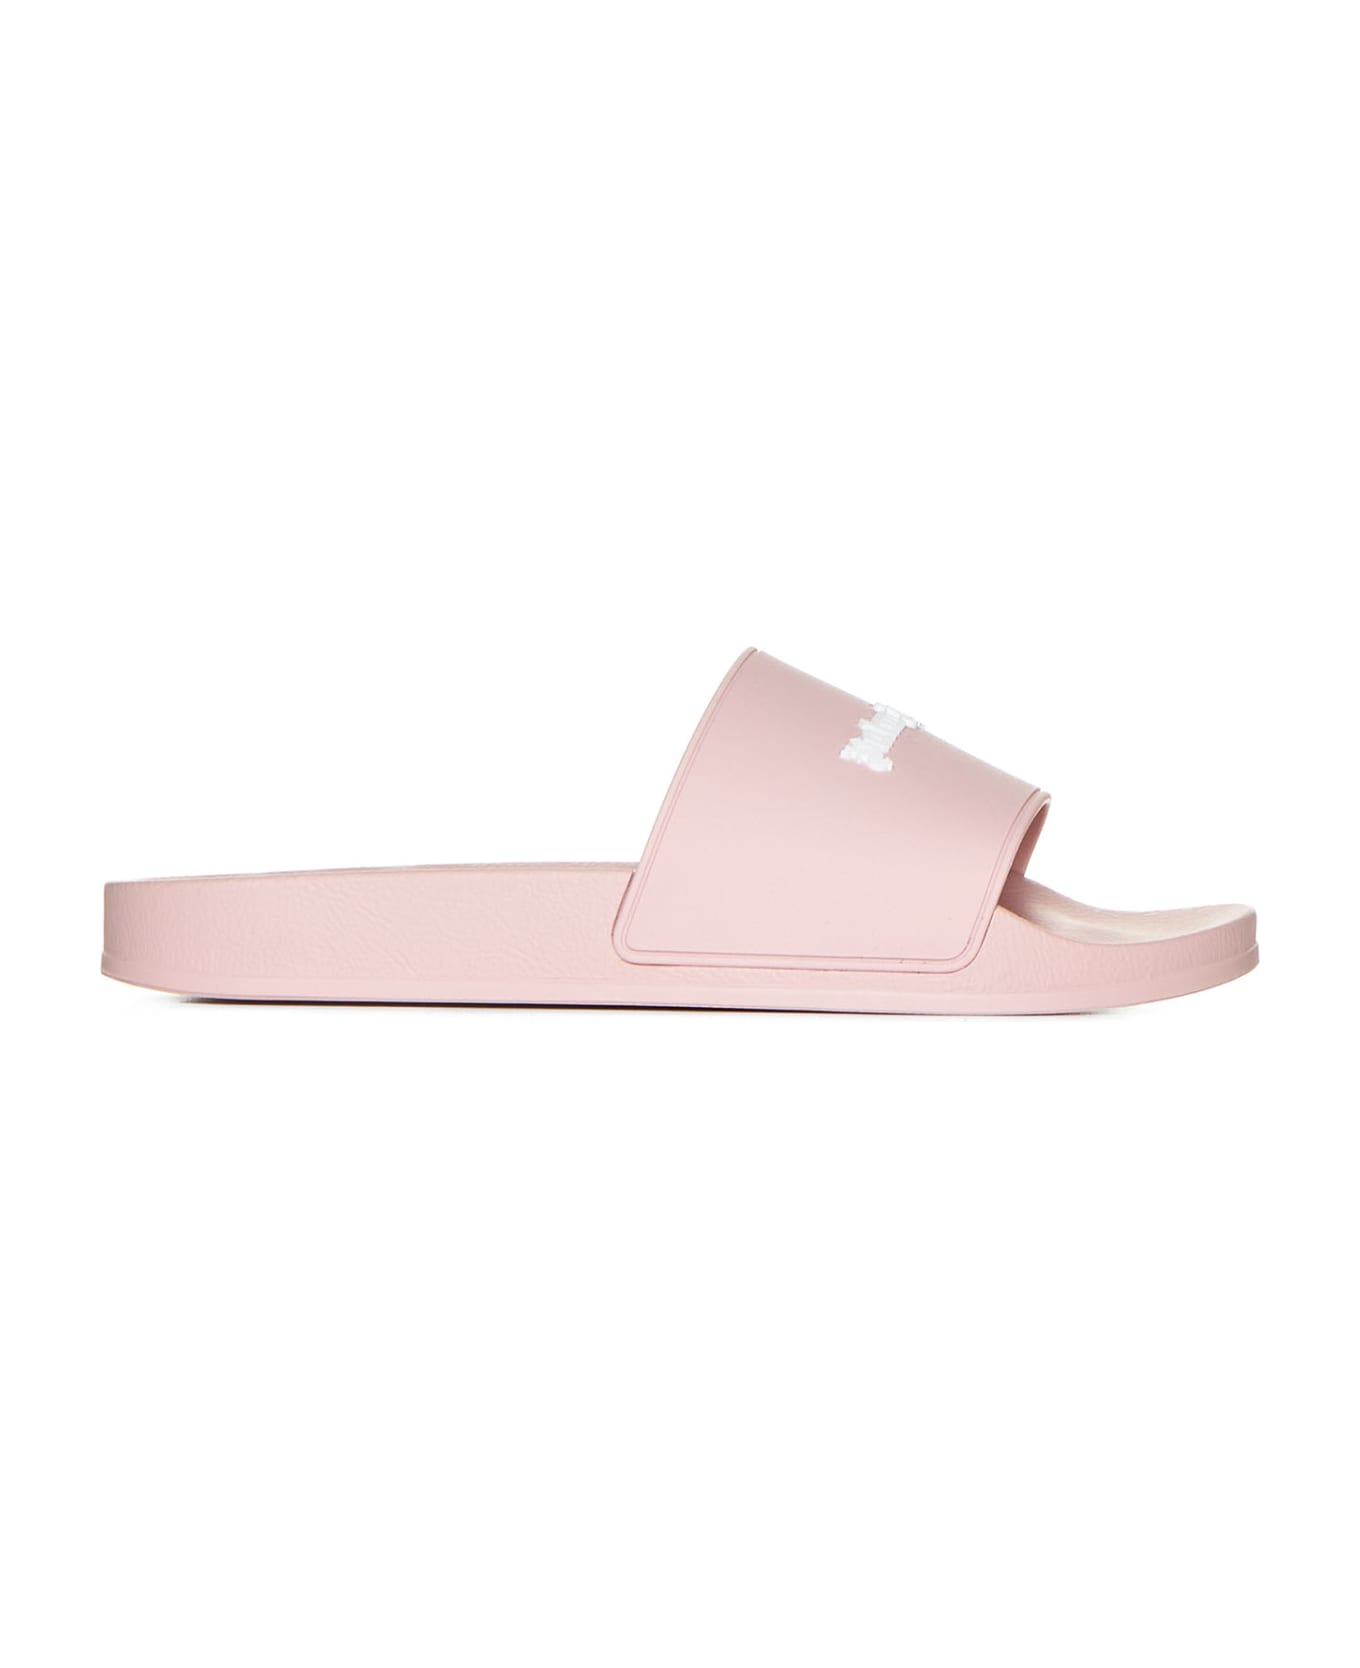 Palm Angels Shoes - Pink white その他各種シューズ